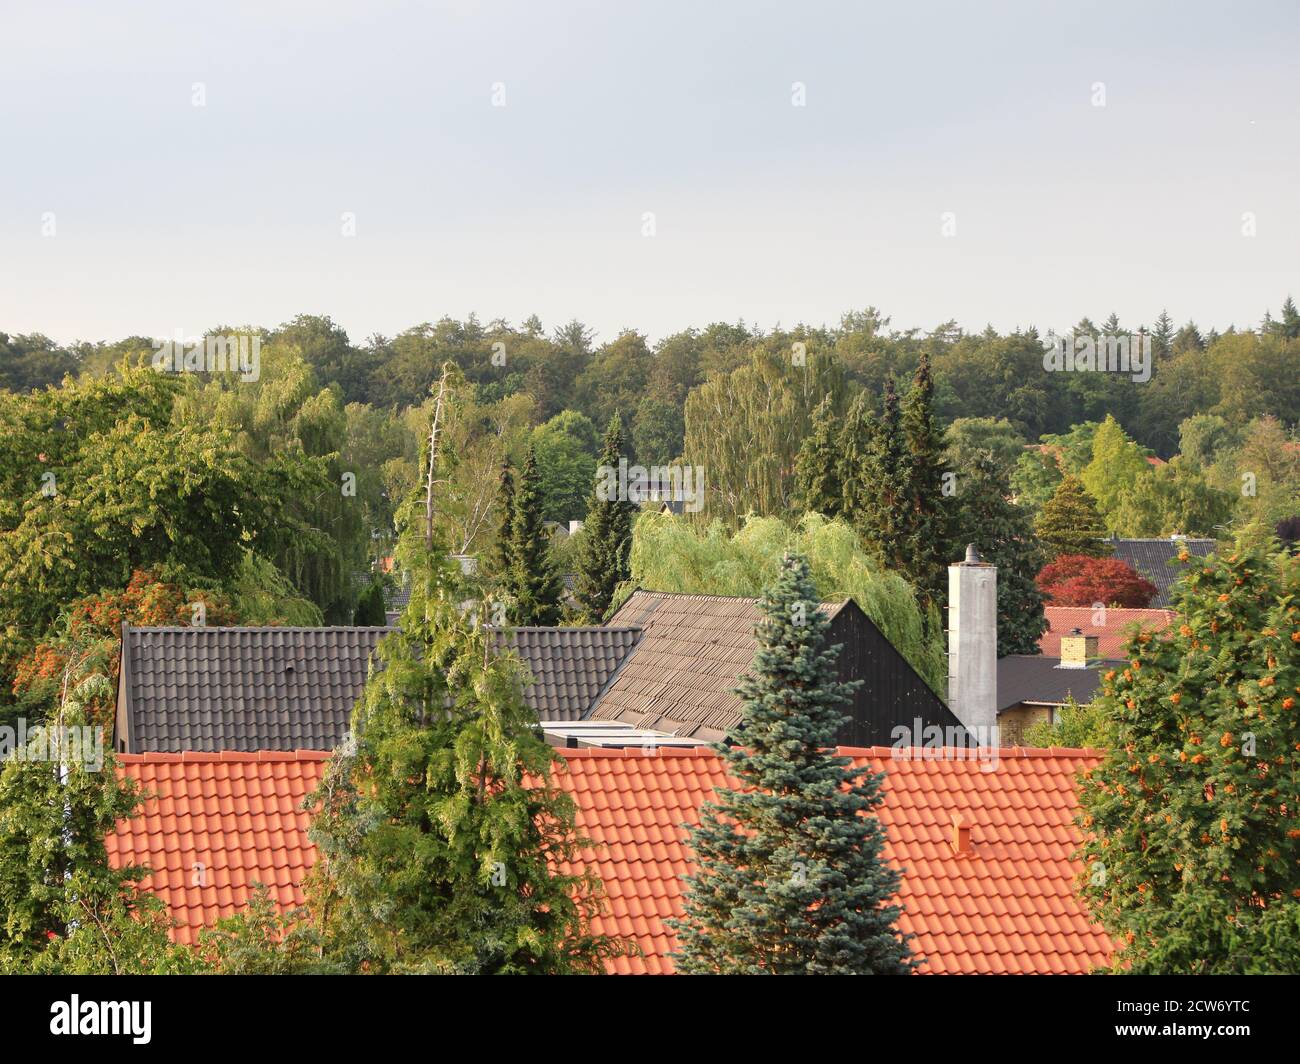 Rooftops in small rural city surrounded by trees in a green forest. Stock Photo